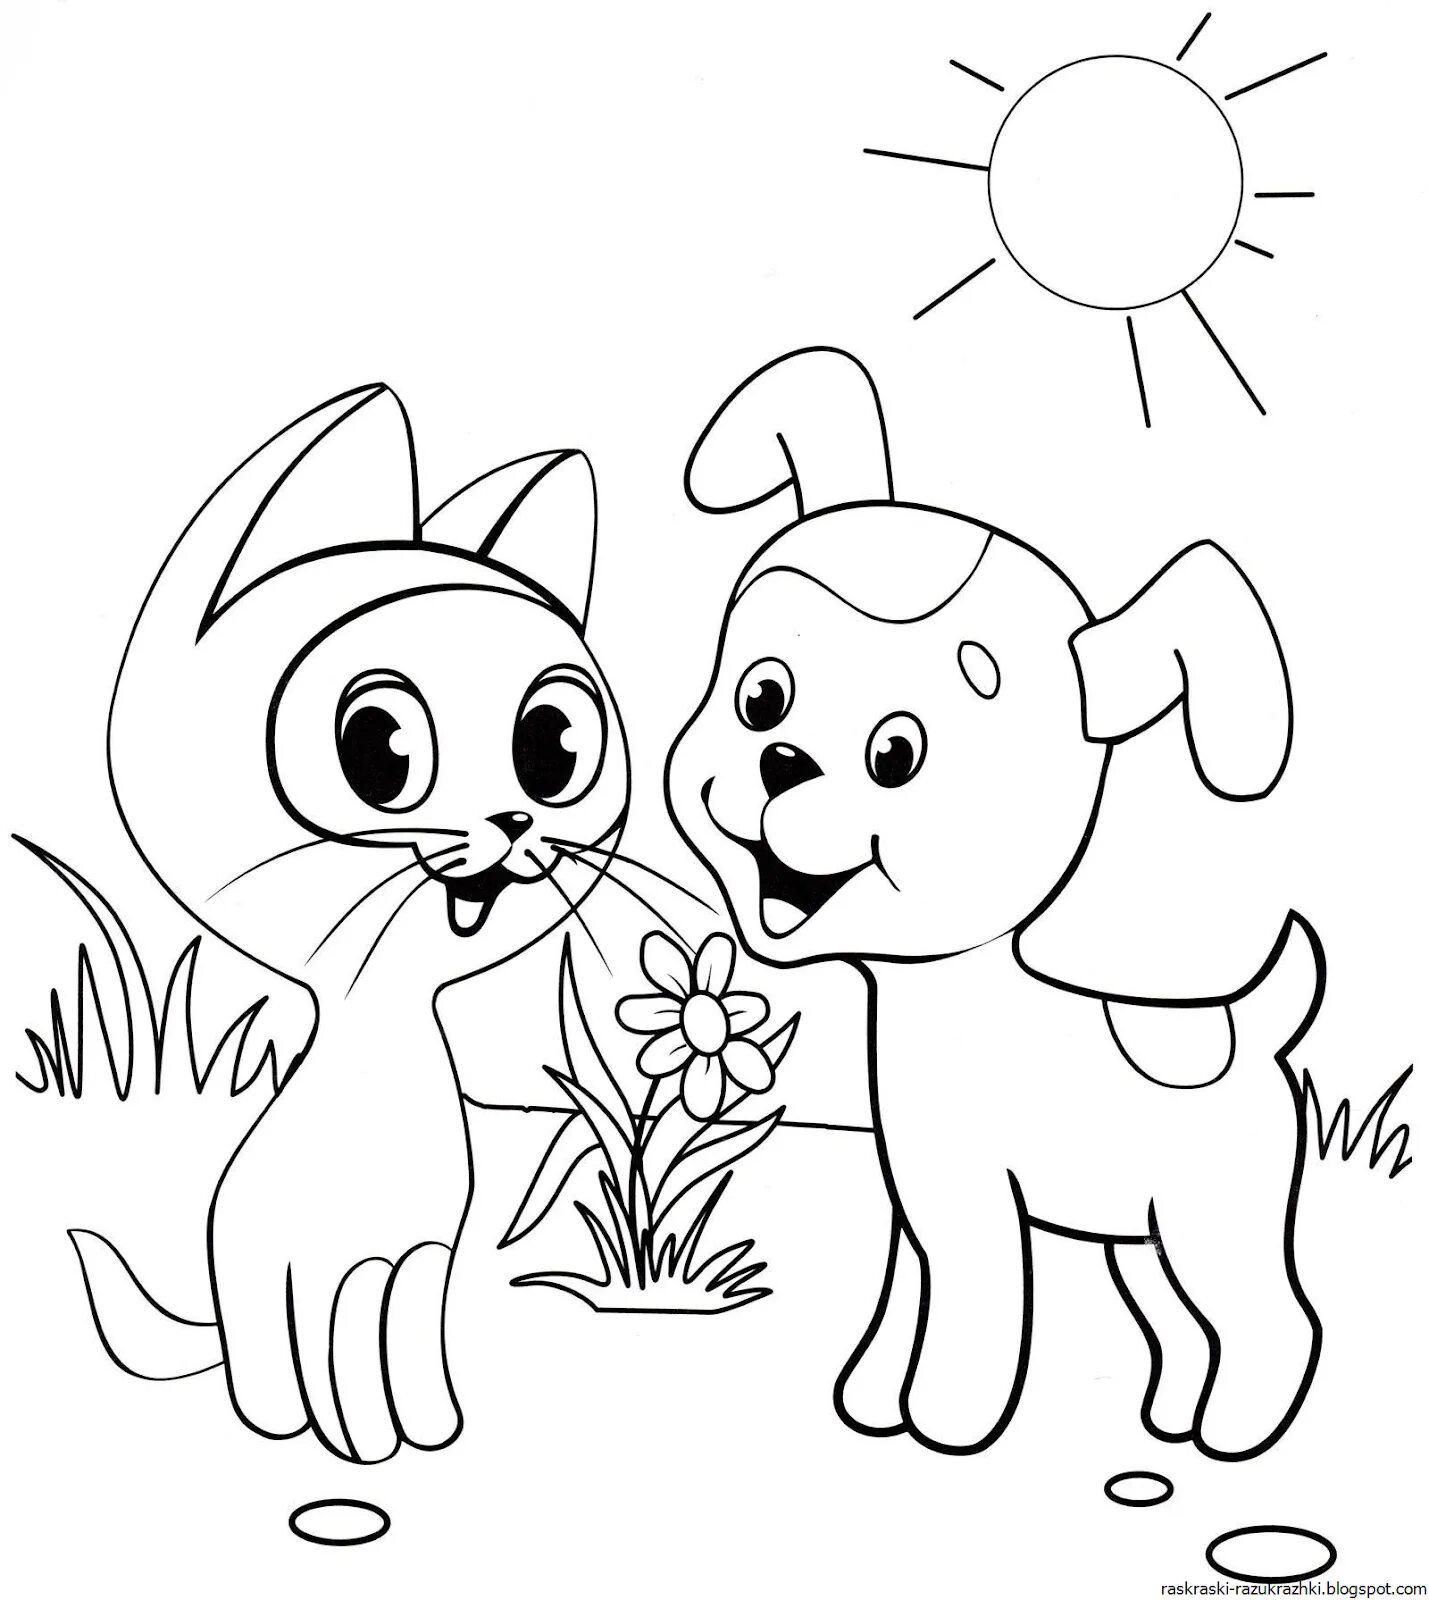 Cats dogs for kids cartoon series #11